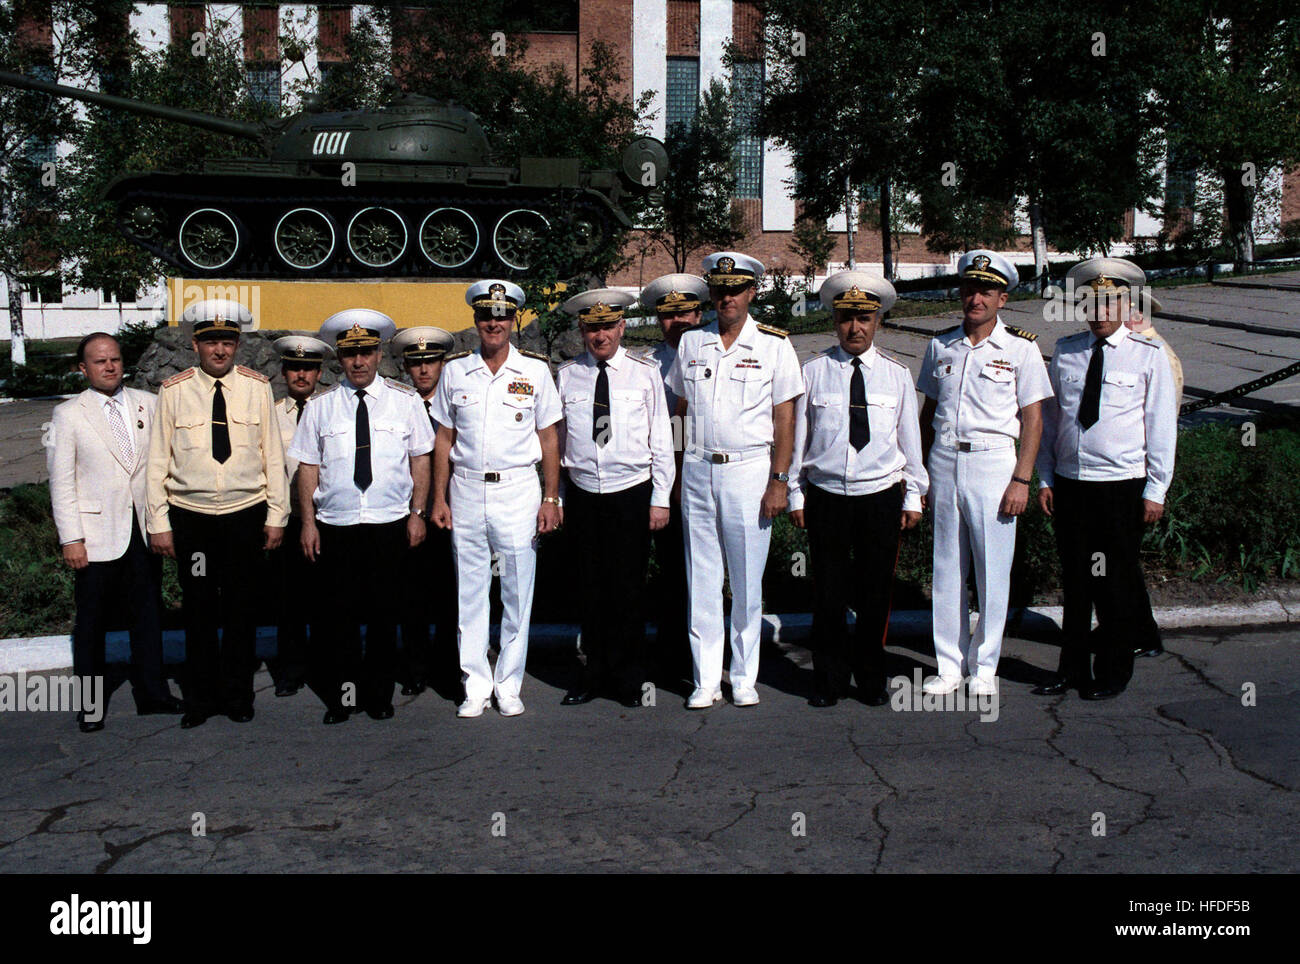 Admiral Gennadi Khvatov, front row, third from left, Commander, Soviet Pacific Fleet,  Admiral Charles R. Larson, front row, fourth from left, Commander in Chief, US Pacific Fleet, and other US and Soviet officers Soviet officers gather in front of a T-54 tank at a Soviet navy service school during a visit to the city by two US Navy ships.  The guided missile cruiser USS PRINCETON (CG-59) and the guided missile frigate USS REUBEN JAMES (FFG 57) are in Vladivostok for four days as part of a goodwill exchange program. US and Soviet navy officers in front of a T-55 tank at the Soviet navy service Stock Photo